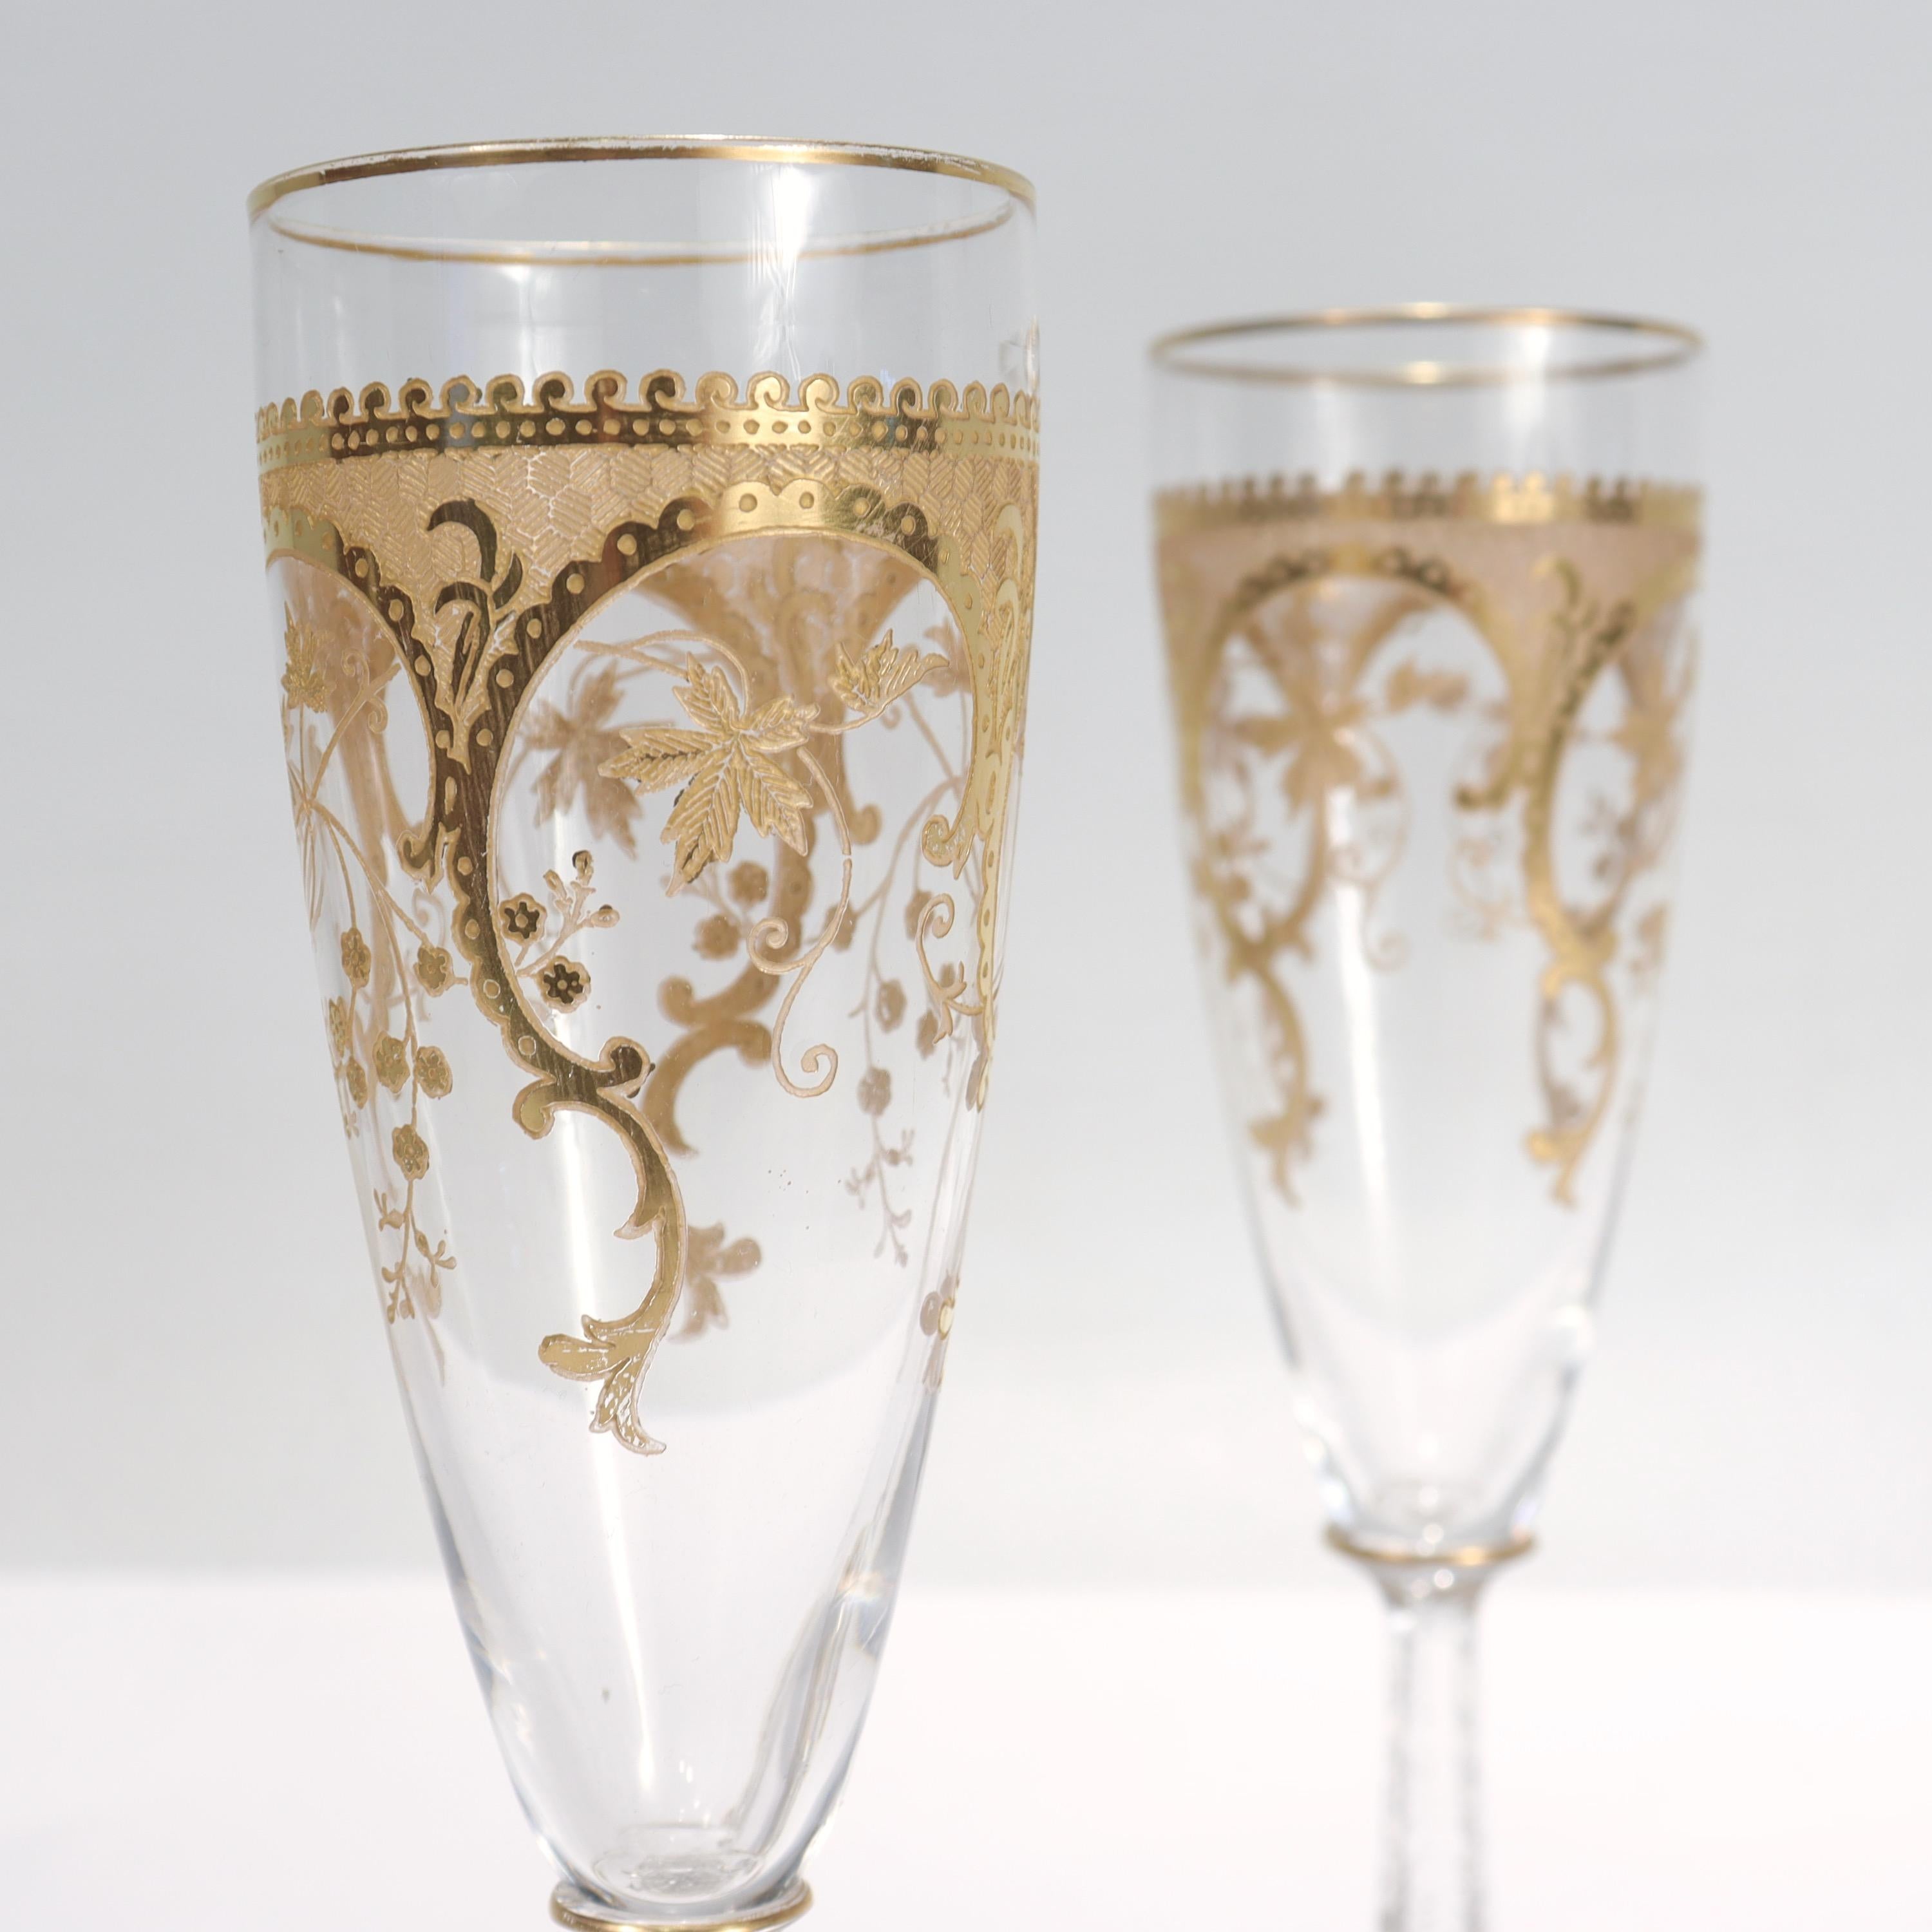 Pair of Richly Gilt Antique Etched & Cut Glass Champagne Stems or Flutes  3